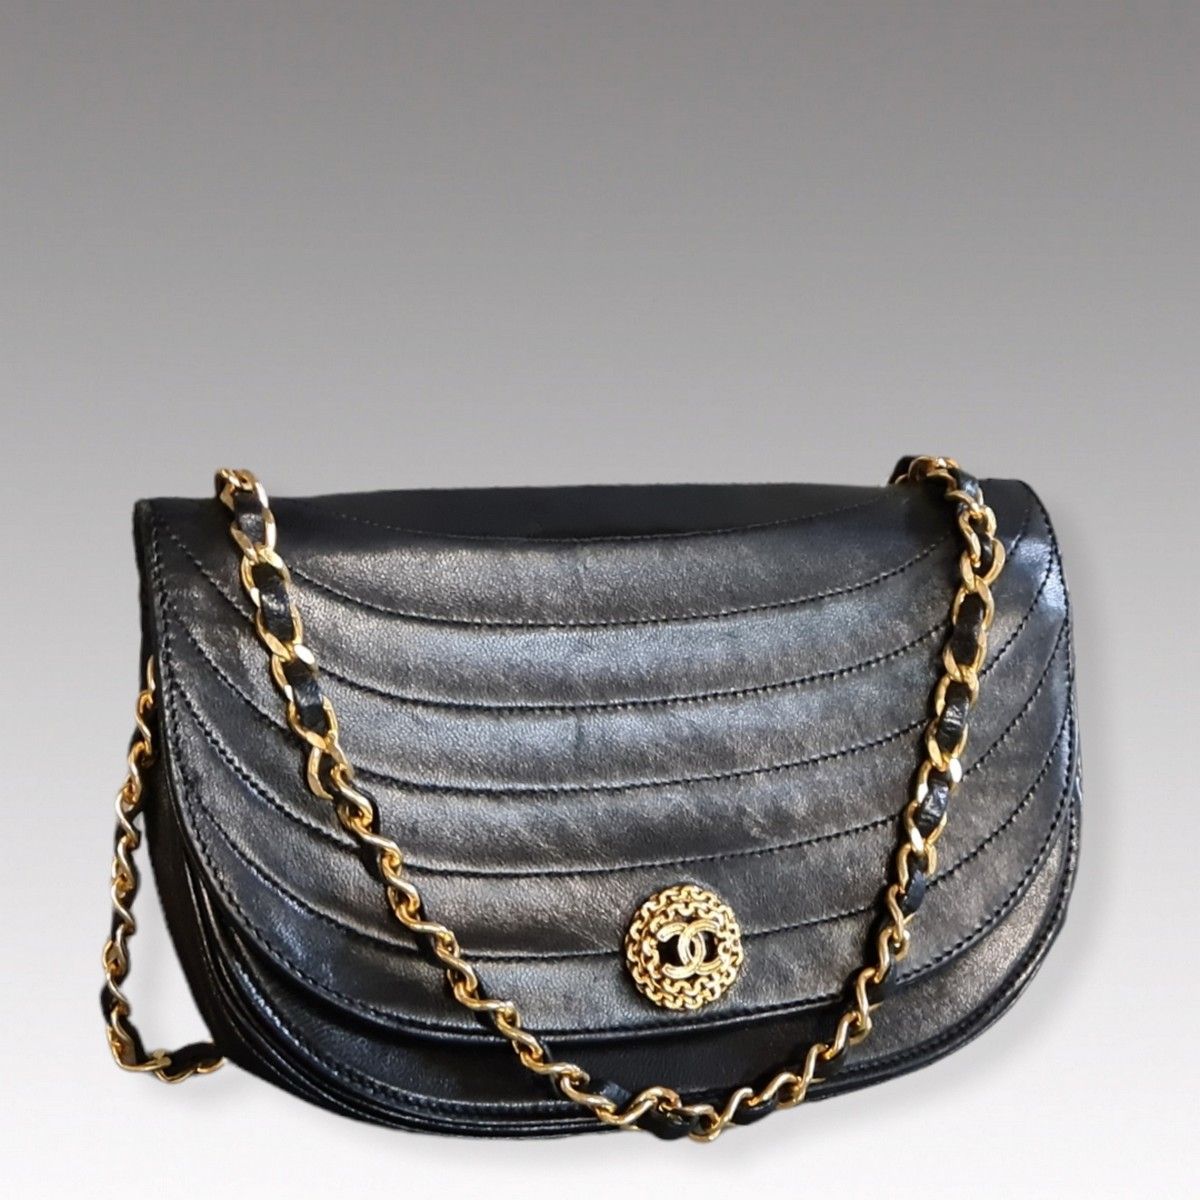 CHANEL circa 1995 - 21 cm half-moon bag in black lambskin leather with wavy  stitching, snap closure on flap, topped with the House's logo in a gilded  metal chain, chain handle intertwined